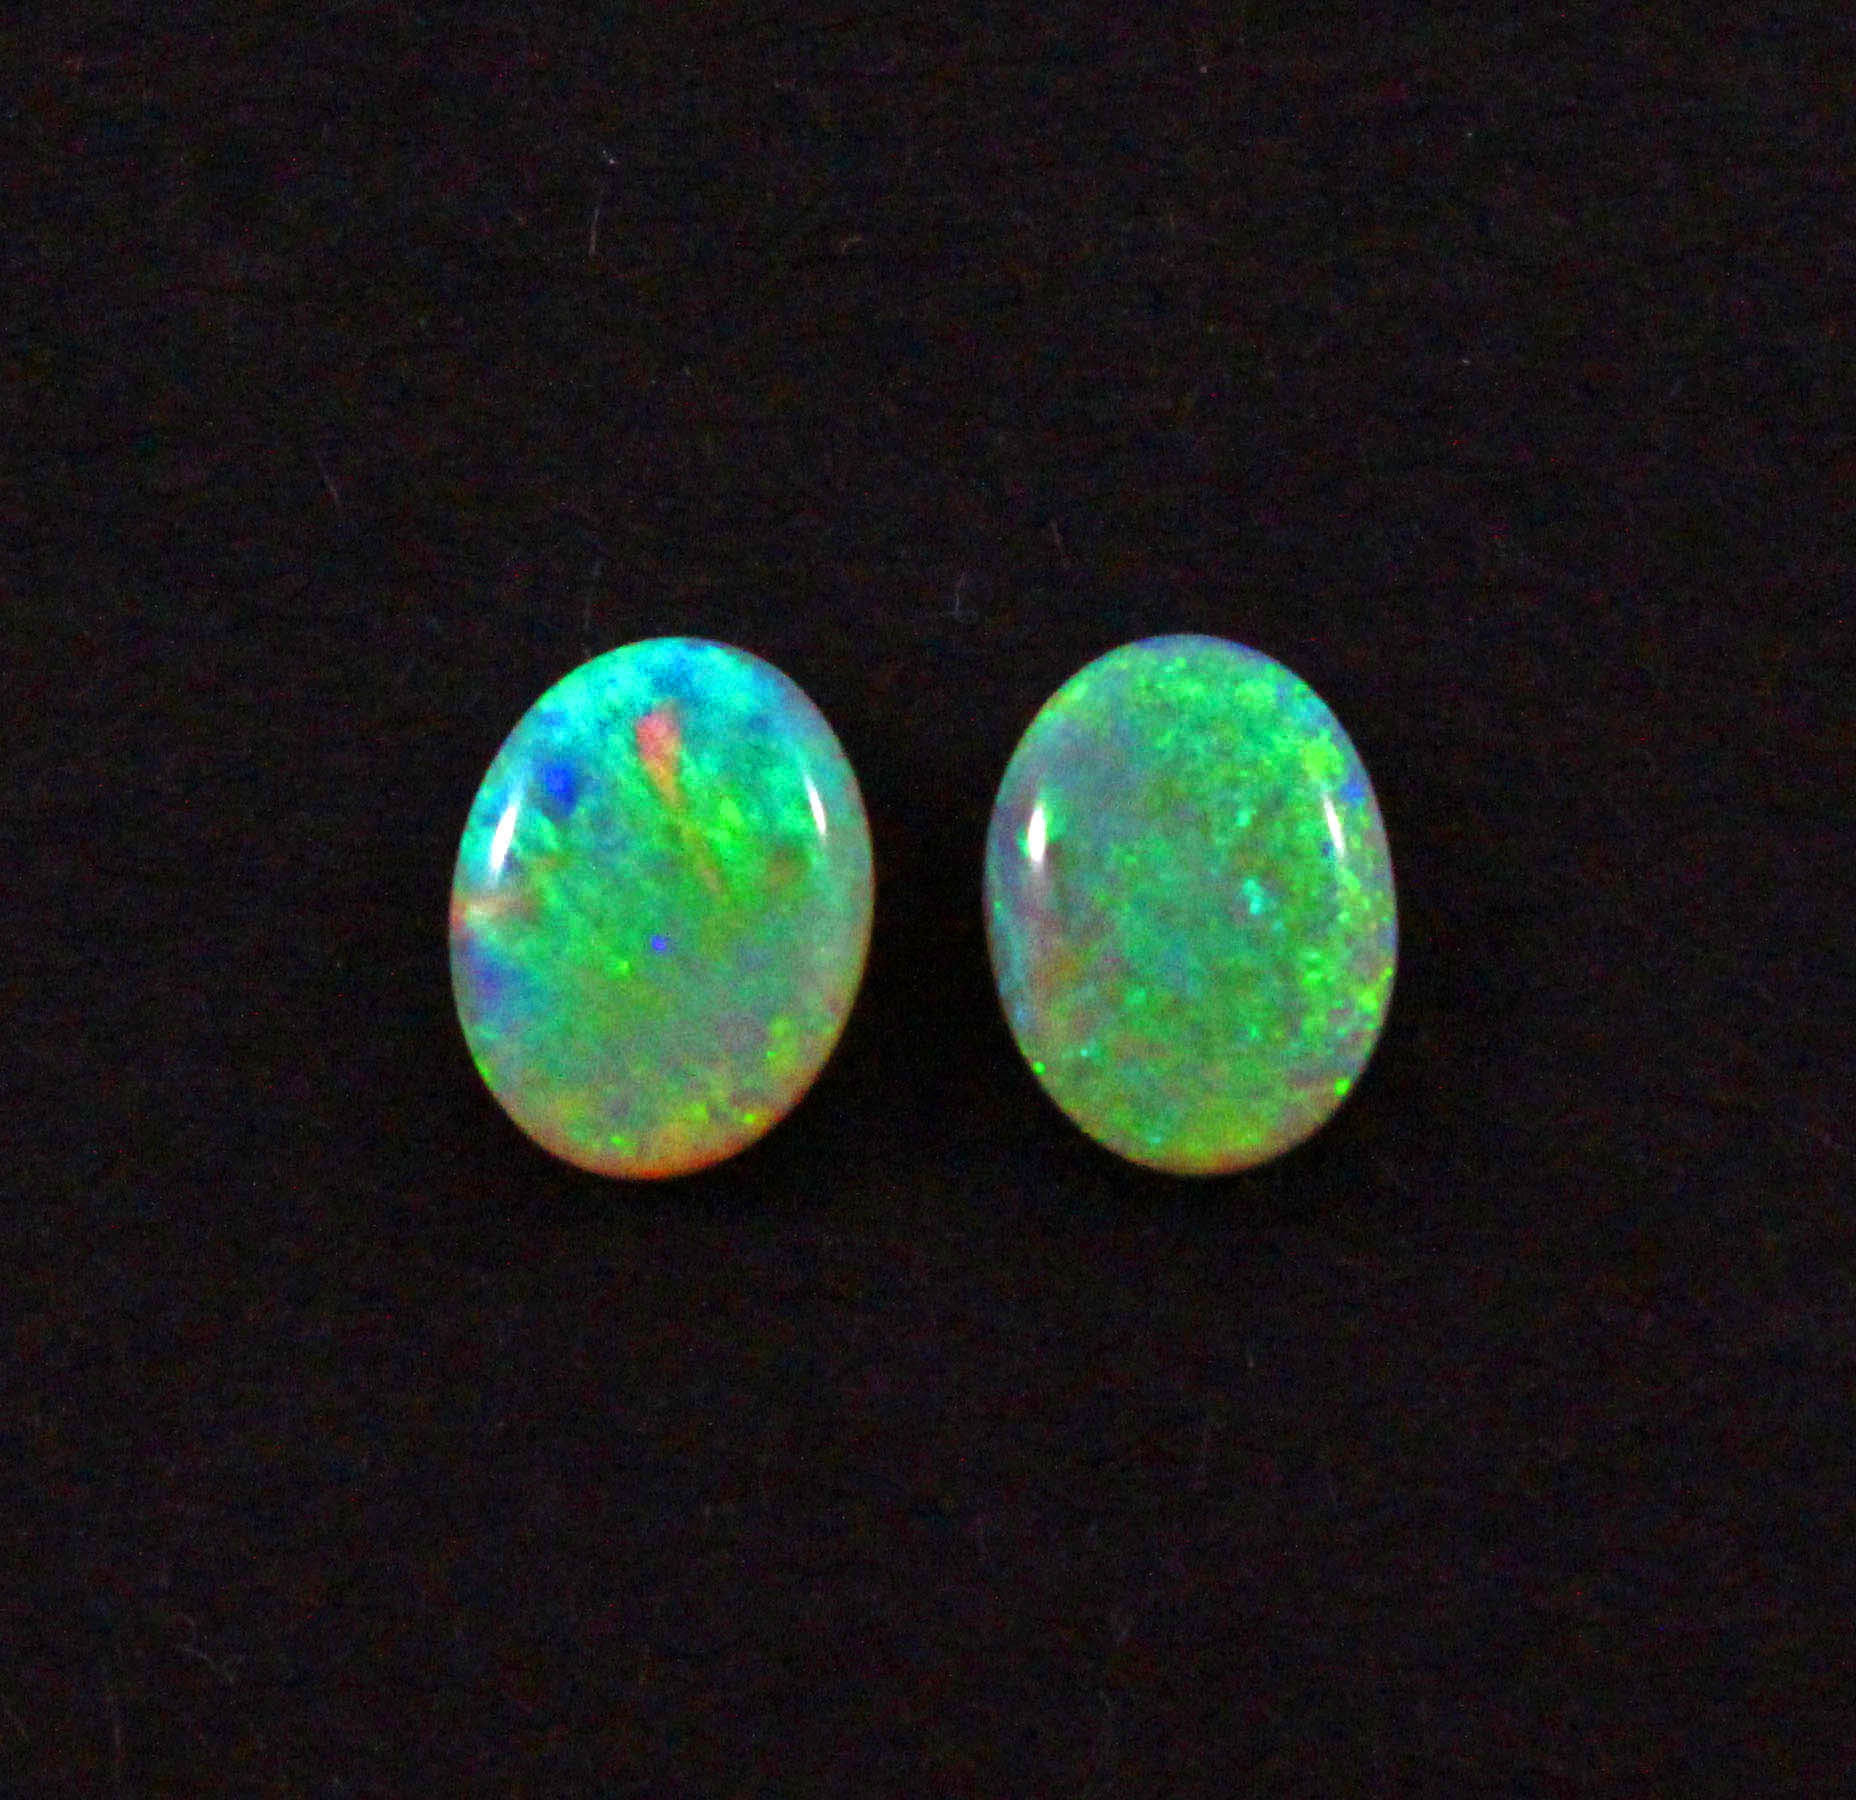 Australian black opal matched pair 2.48 carat total loose gemstone - Purchase only with custom order - Sarah Hughes - 6